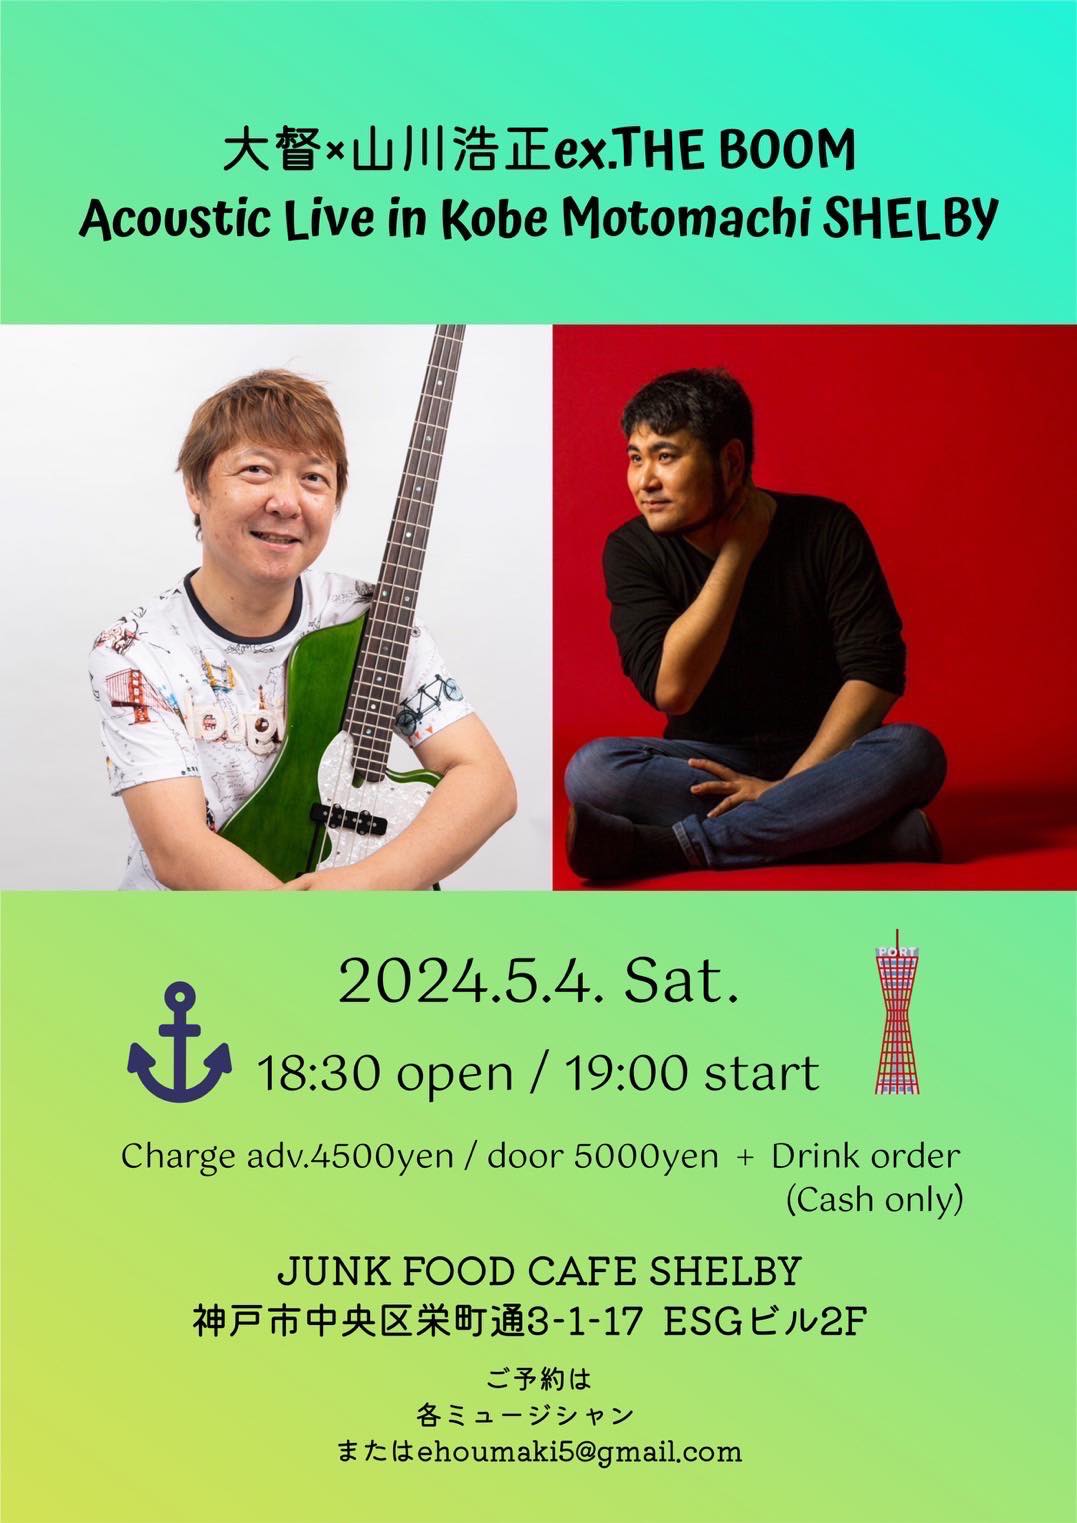 2024.5.4. Sat. 大督＊山川浩正ex.THE BOOMAcoustic Live in Kobe Motomachi SHELBY